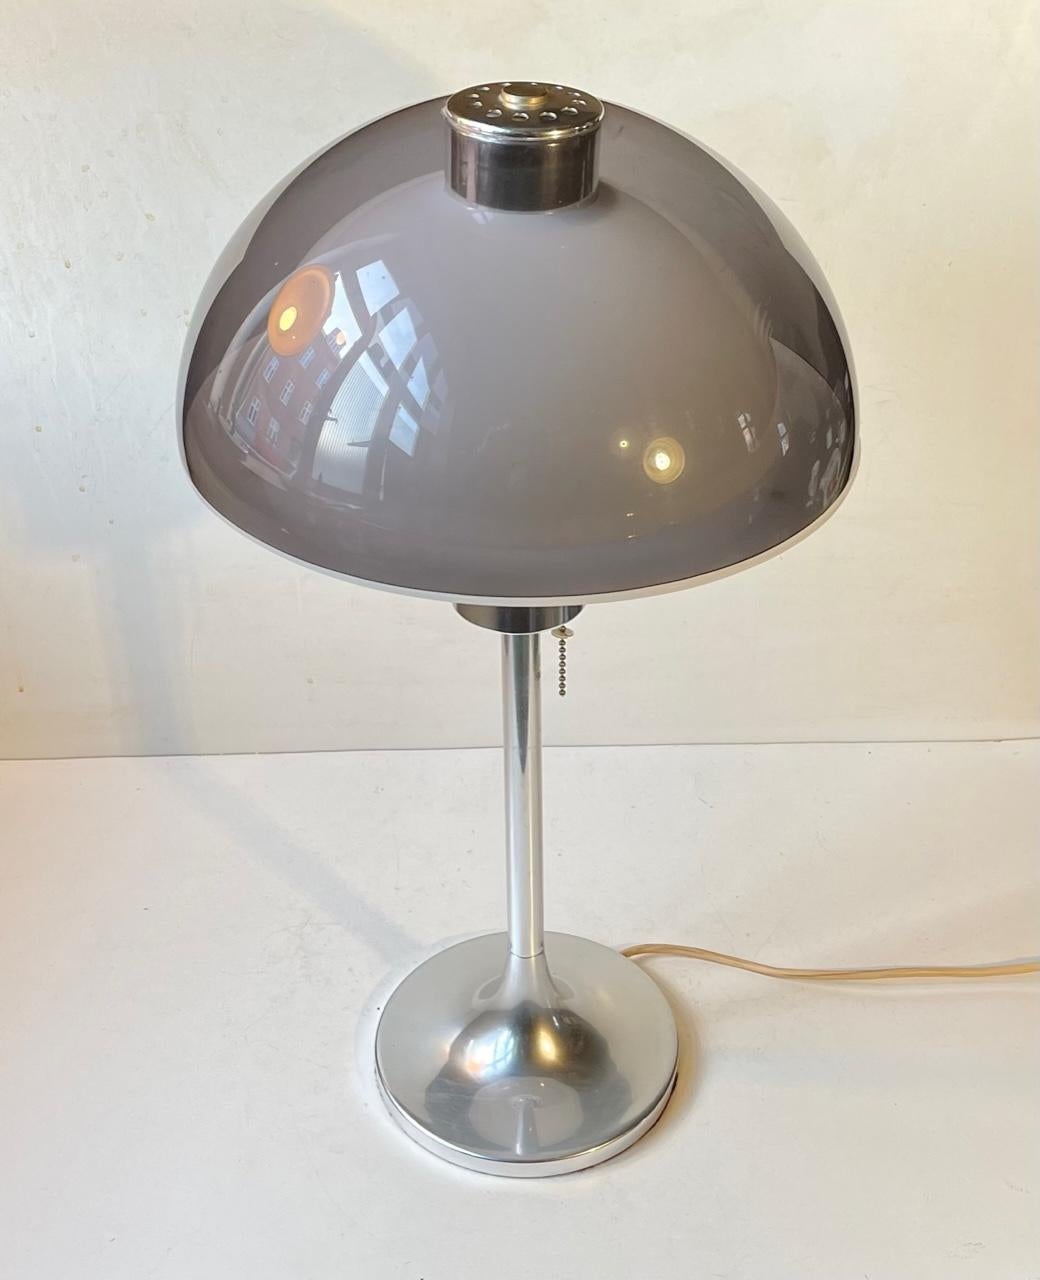 A stylish space age table or desk lamp designed in 1966 by Robert Welch and manufactured by Lumitron in England. Inner plastic diffuser in white with outer dome of grey transparent acrylic. It features a base in polished aluminium and a string on/of